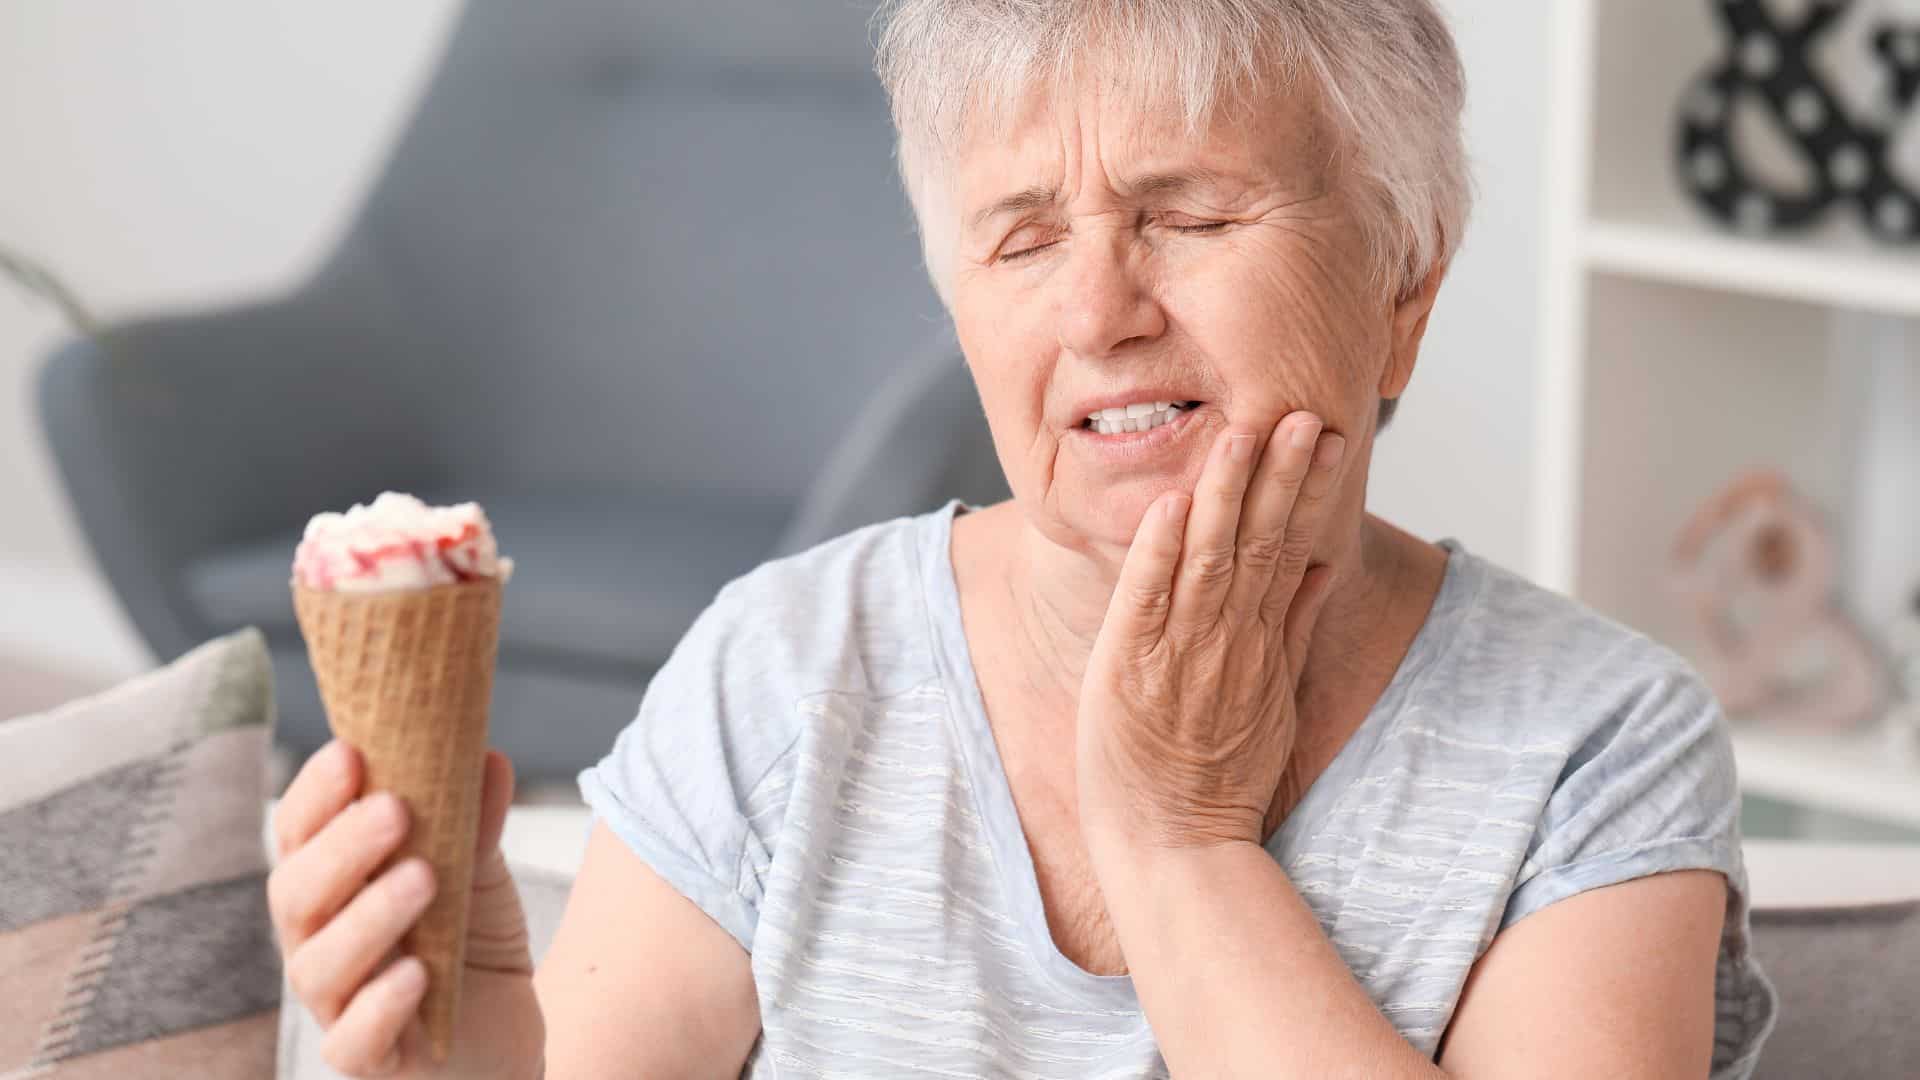 woman eating an ice cream cone holding her jaw because of tooth sensitivity